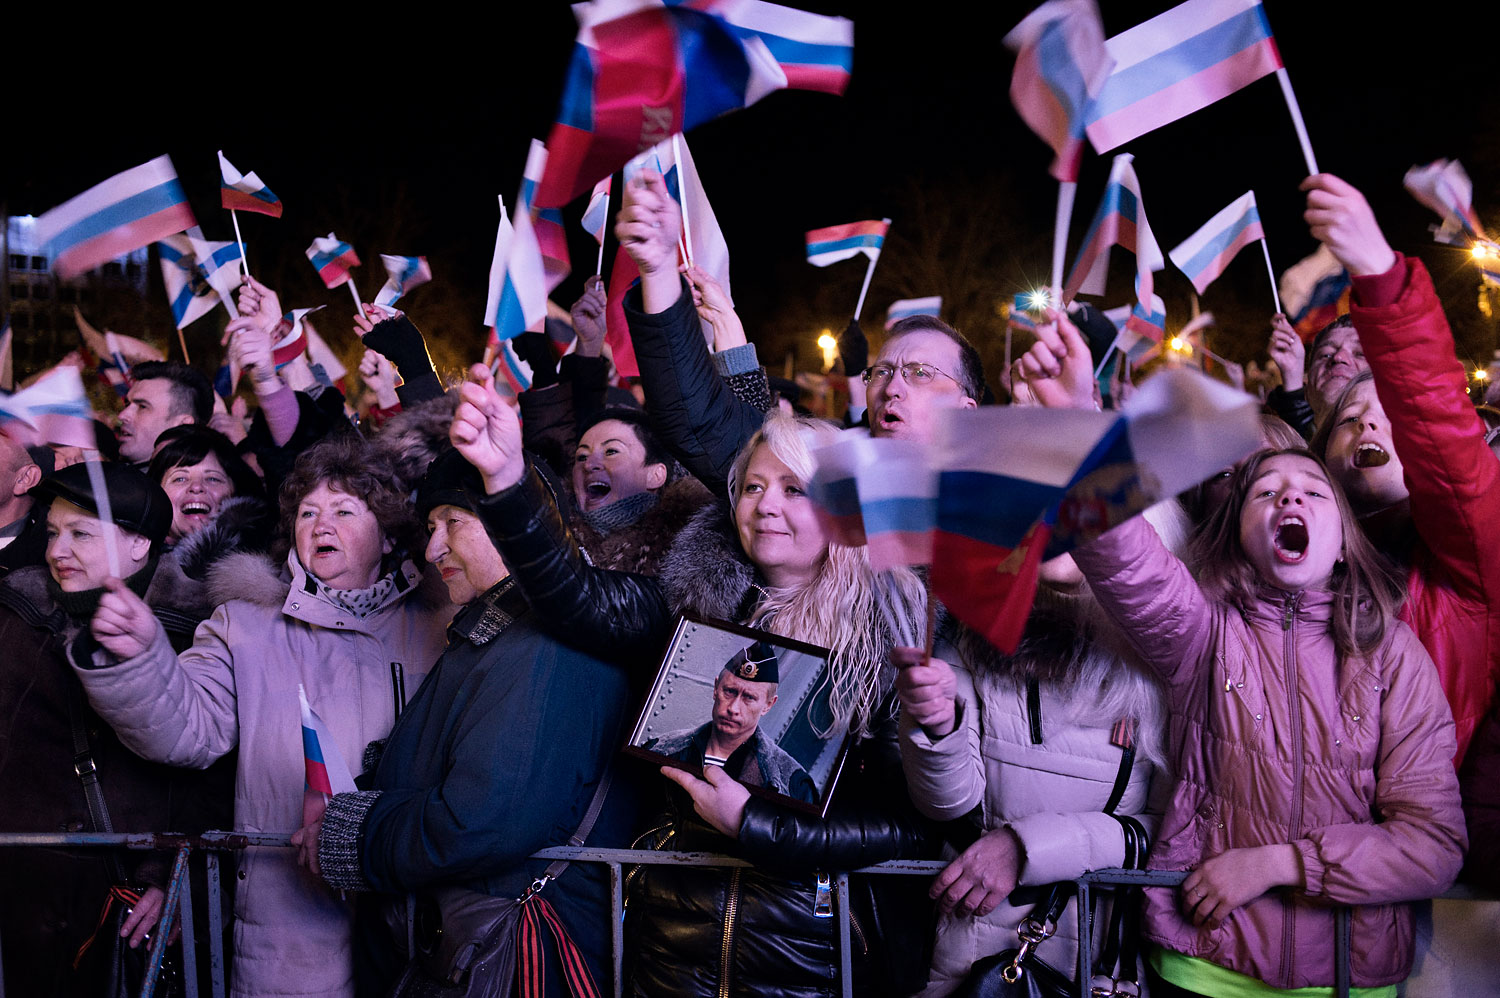 A jubilant crowd in Crimea waits for the results of the referendum in the Crimean city of Sevastopol on March 16, 2014.